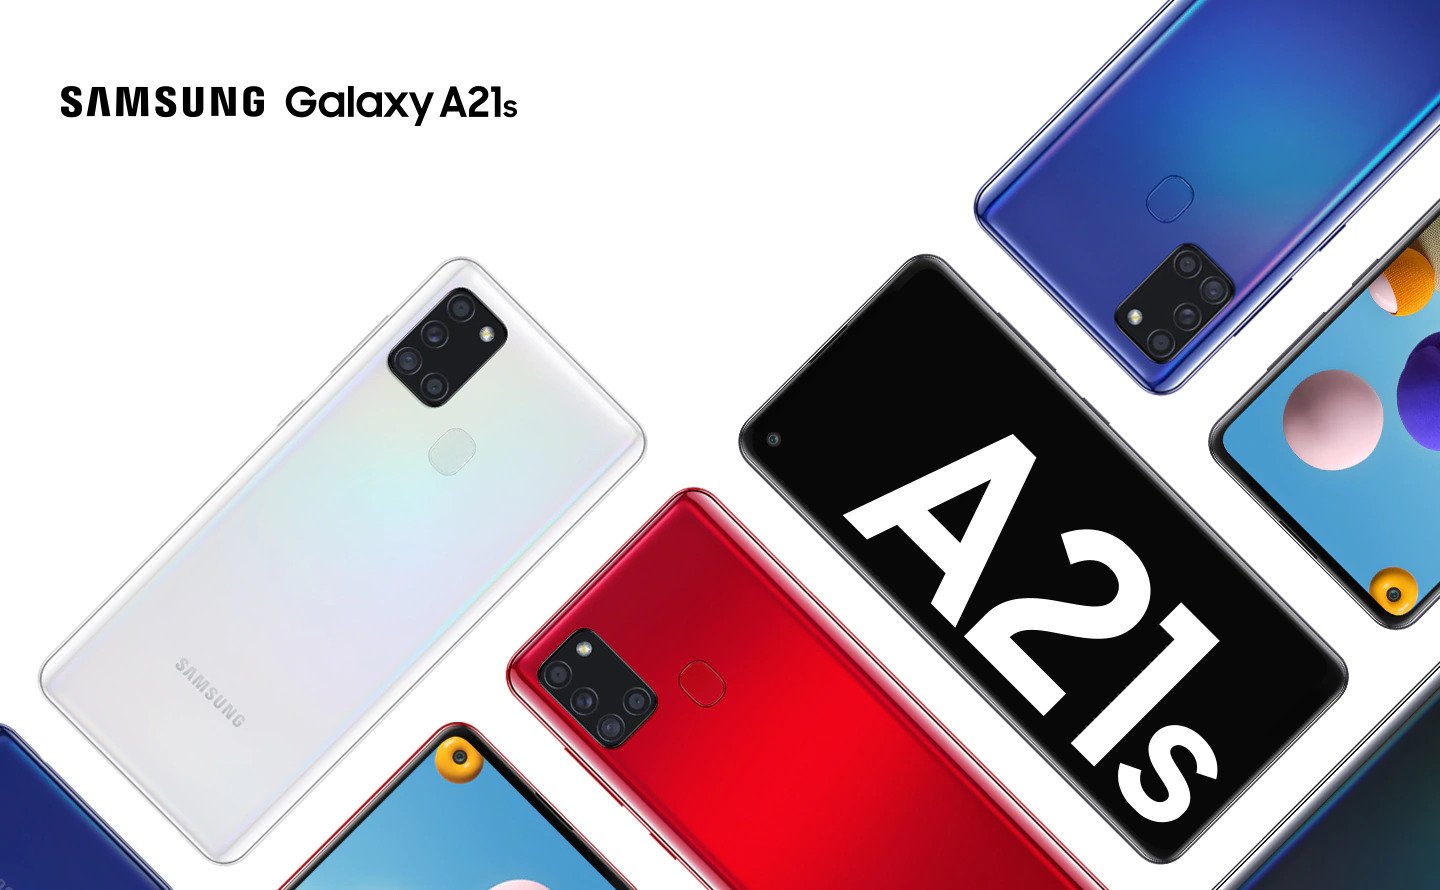 Samsung Galaxy A21s receives One UI 3.0 (Android 11) update ahead of schedule